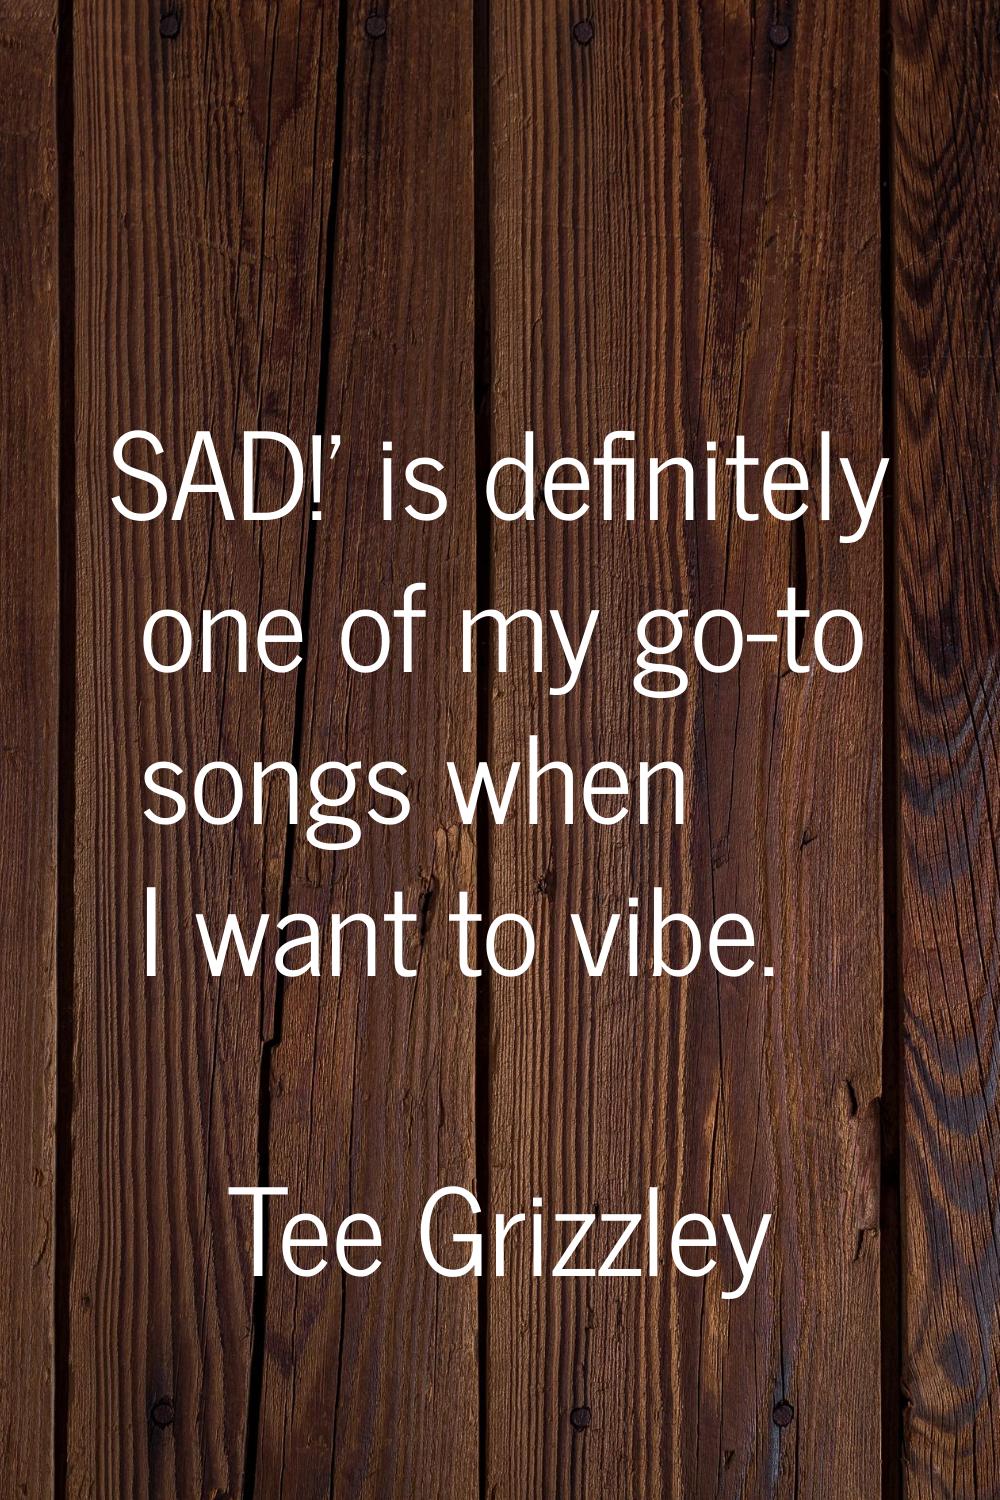 SAD!' is definitely one of my go-to songs when I want to vibe.